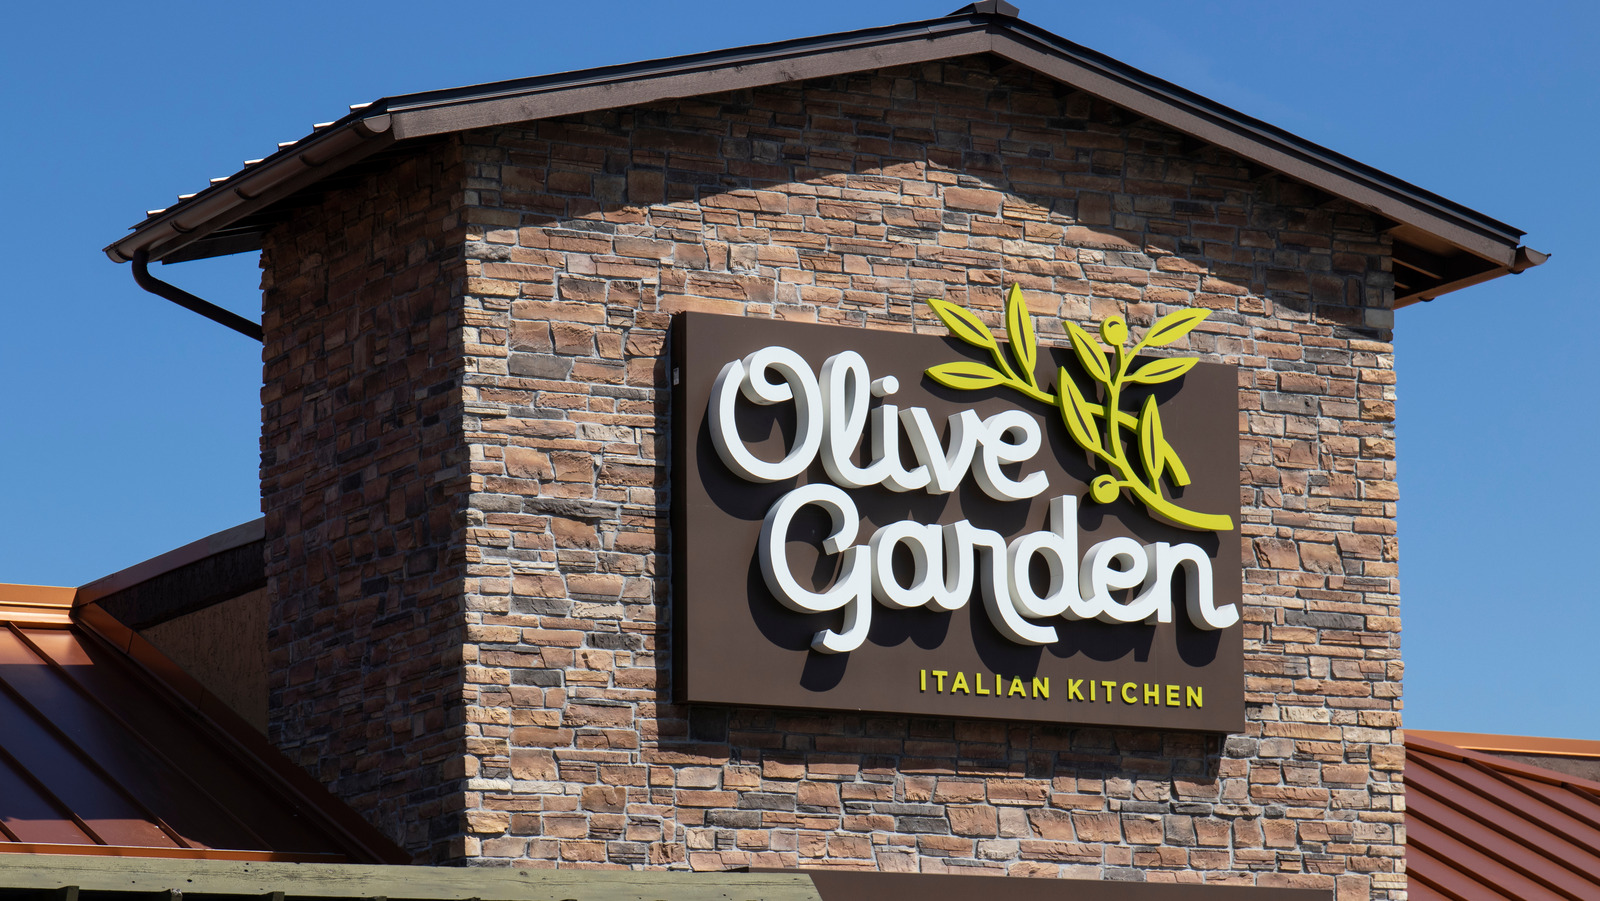 The Best Soup At Olive Garden According To 33% Of People